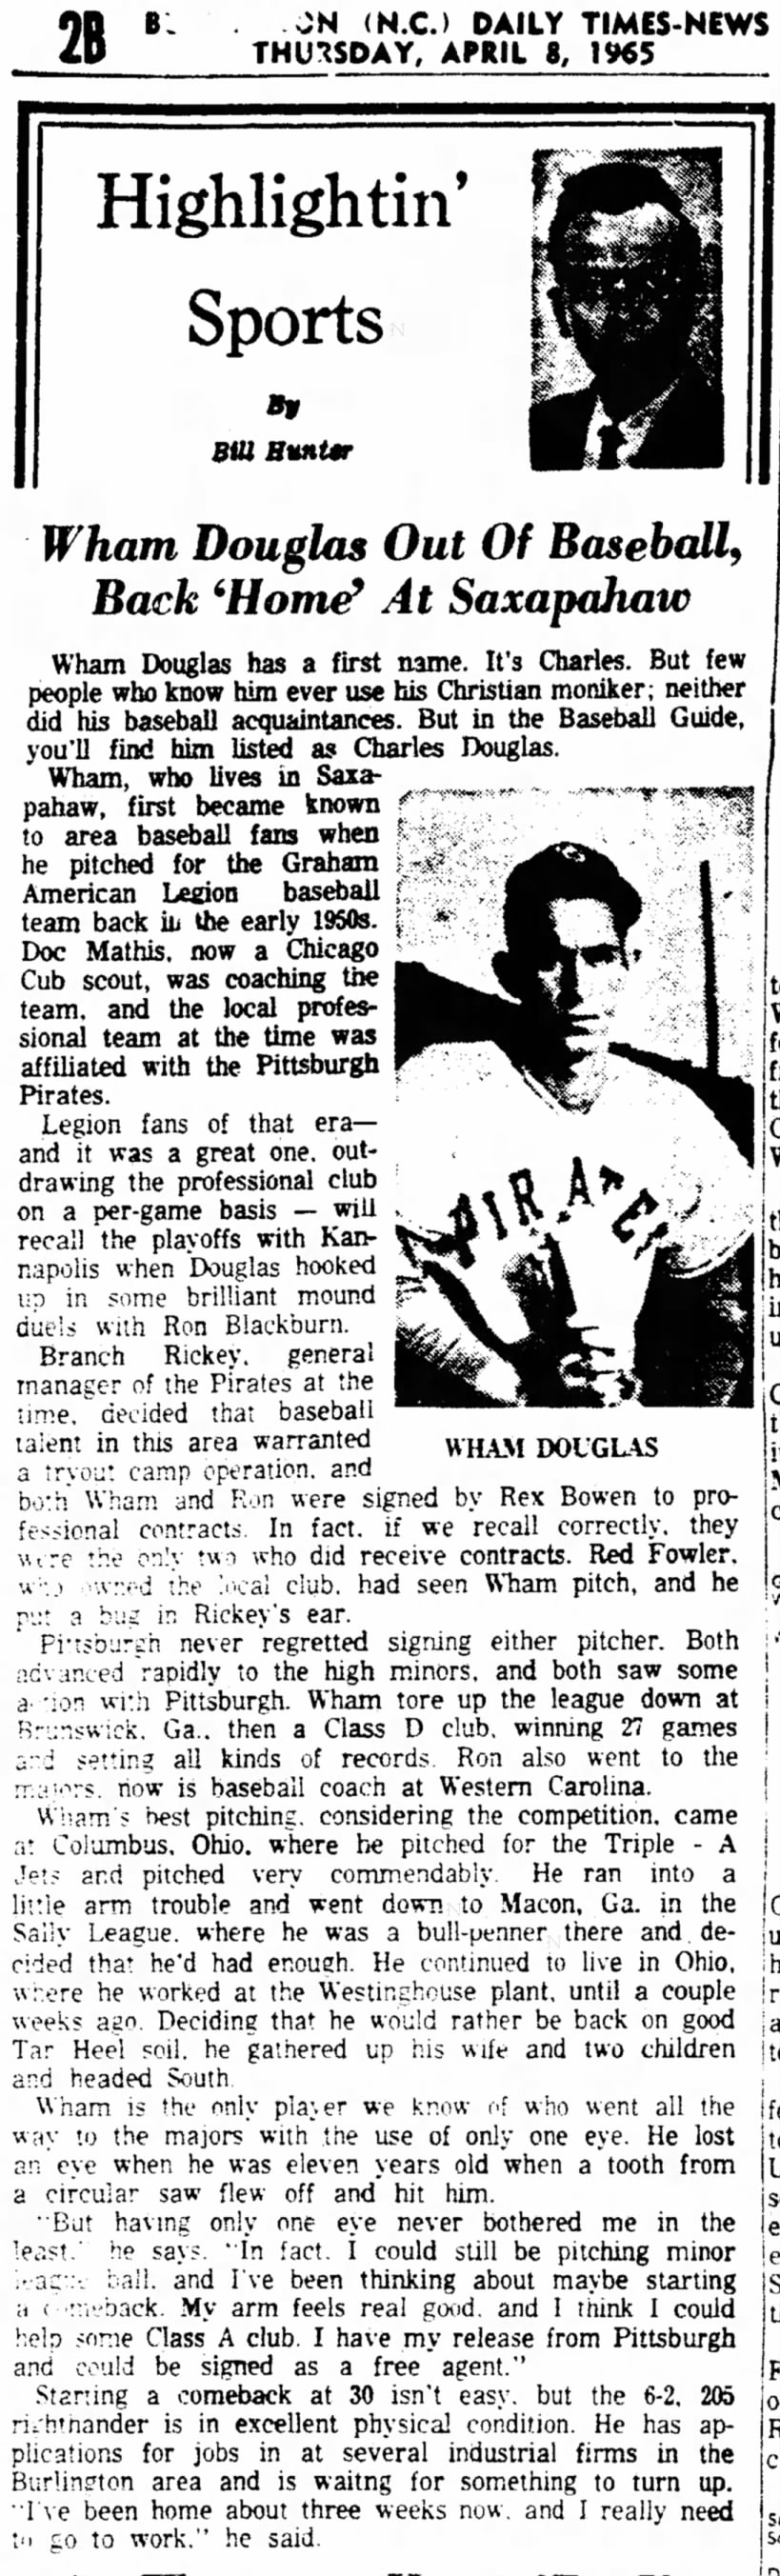 Apr 8, 1965: "Wham" Douglas, out of baseball; back home at Saxapahaw